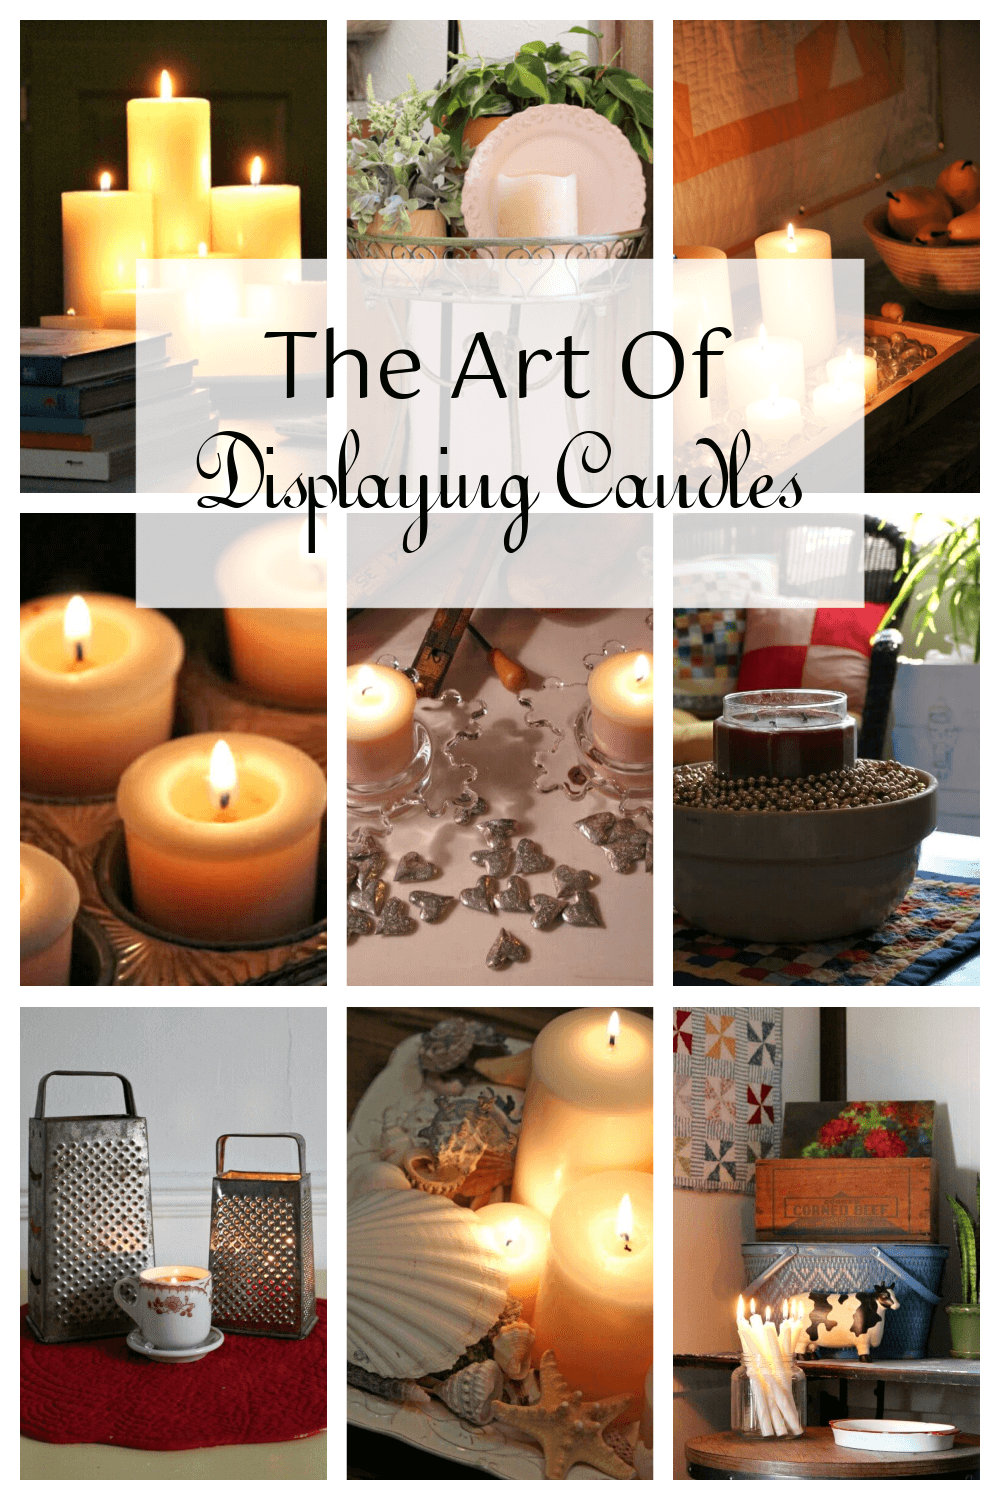 The Art Of Displaying Candles